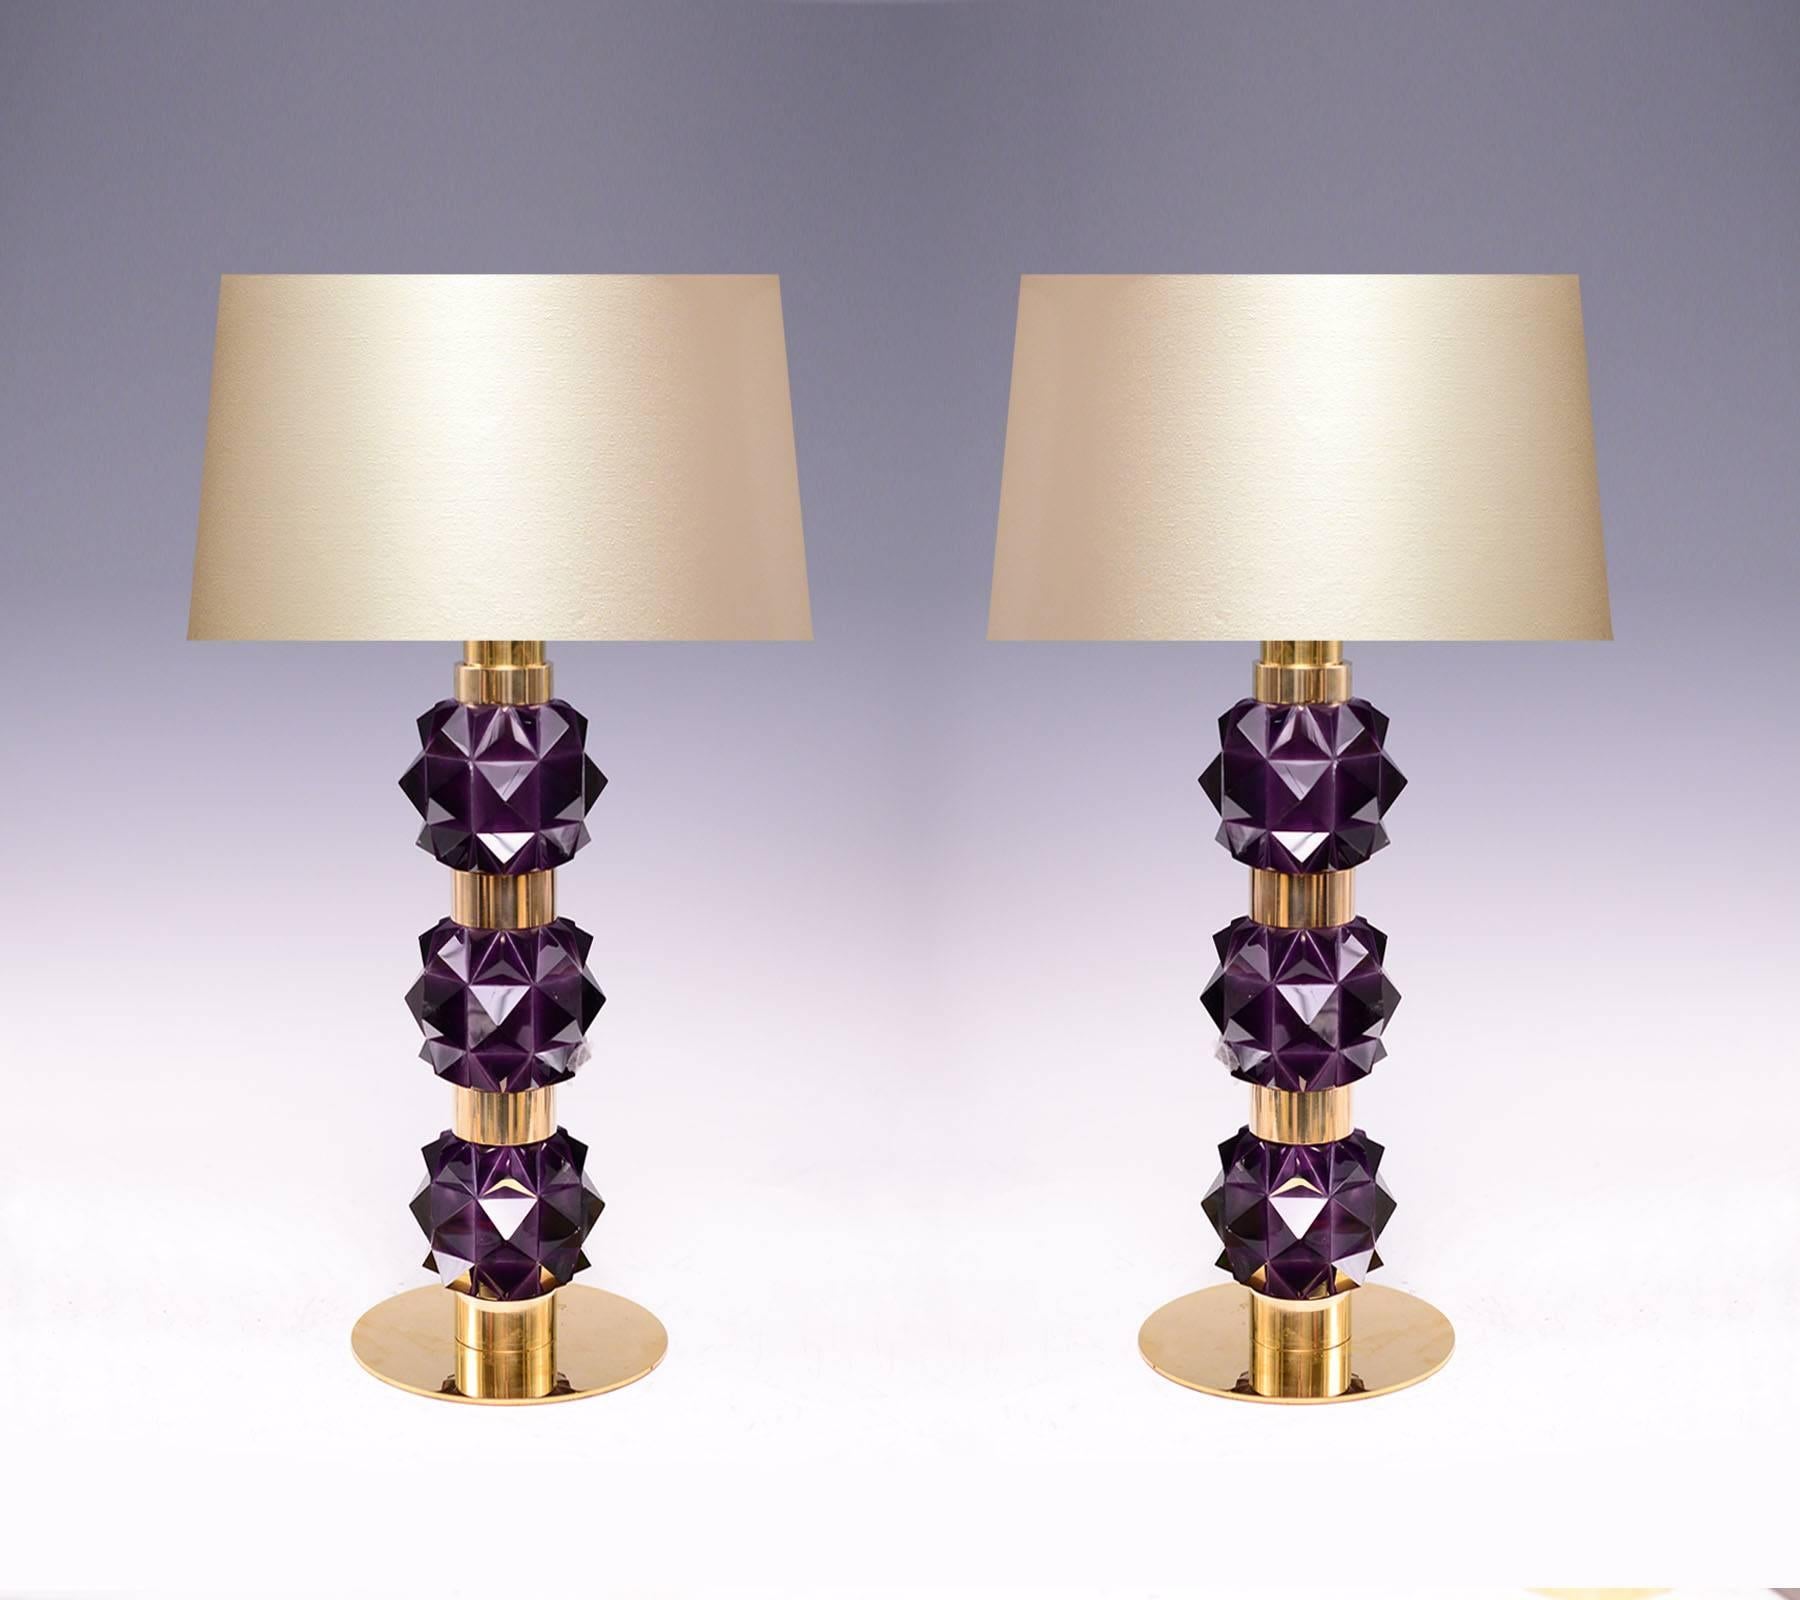 A pair of fine carved rock candy form amethyst rock crystal quartz lamps with polished brass decorations, created by Phoenix gallery.
Lampshade not included.
